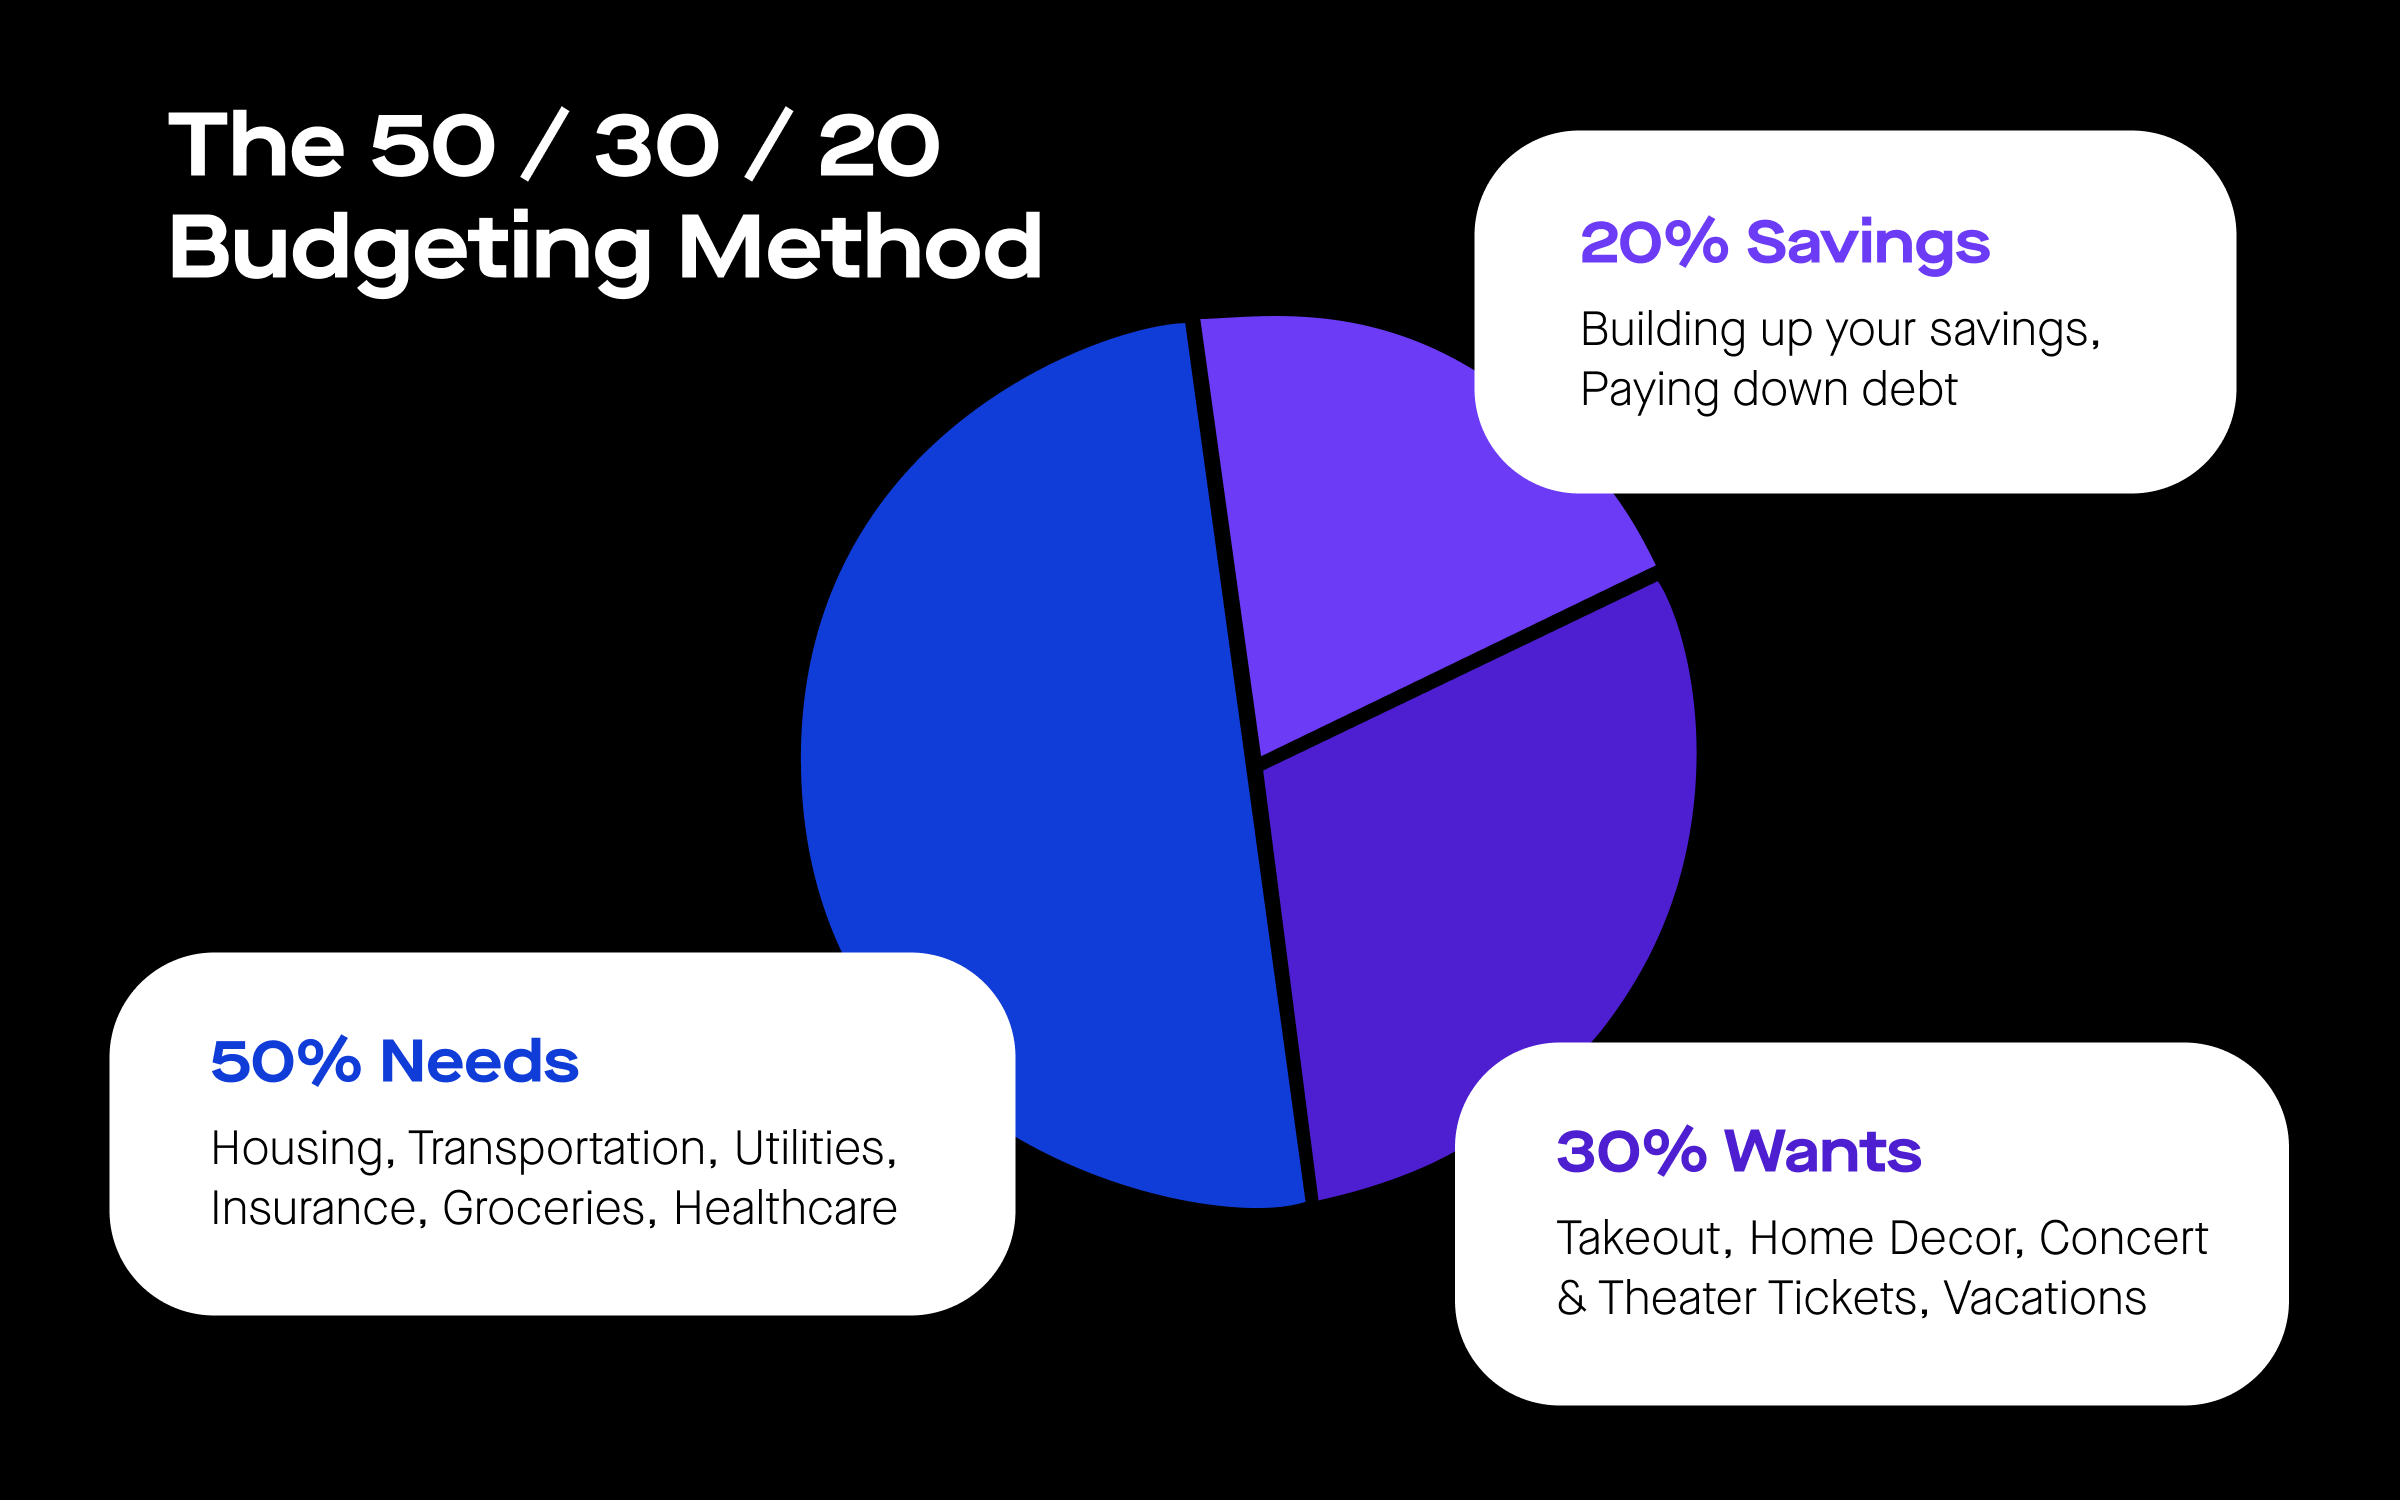 Graph of The 50/30/20 Budgeting Method: "50% Needs - Housing, Transportation, Utilities, Insurance, Groceries, Healthcare", "30% Wants - Takeout, Home Decor, Concert & Theater Tickets, Vacations", "20% Savings - Building up your savings, Paying down debt".